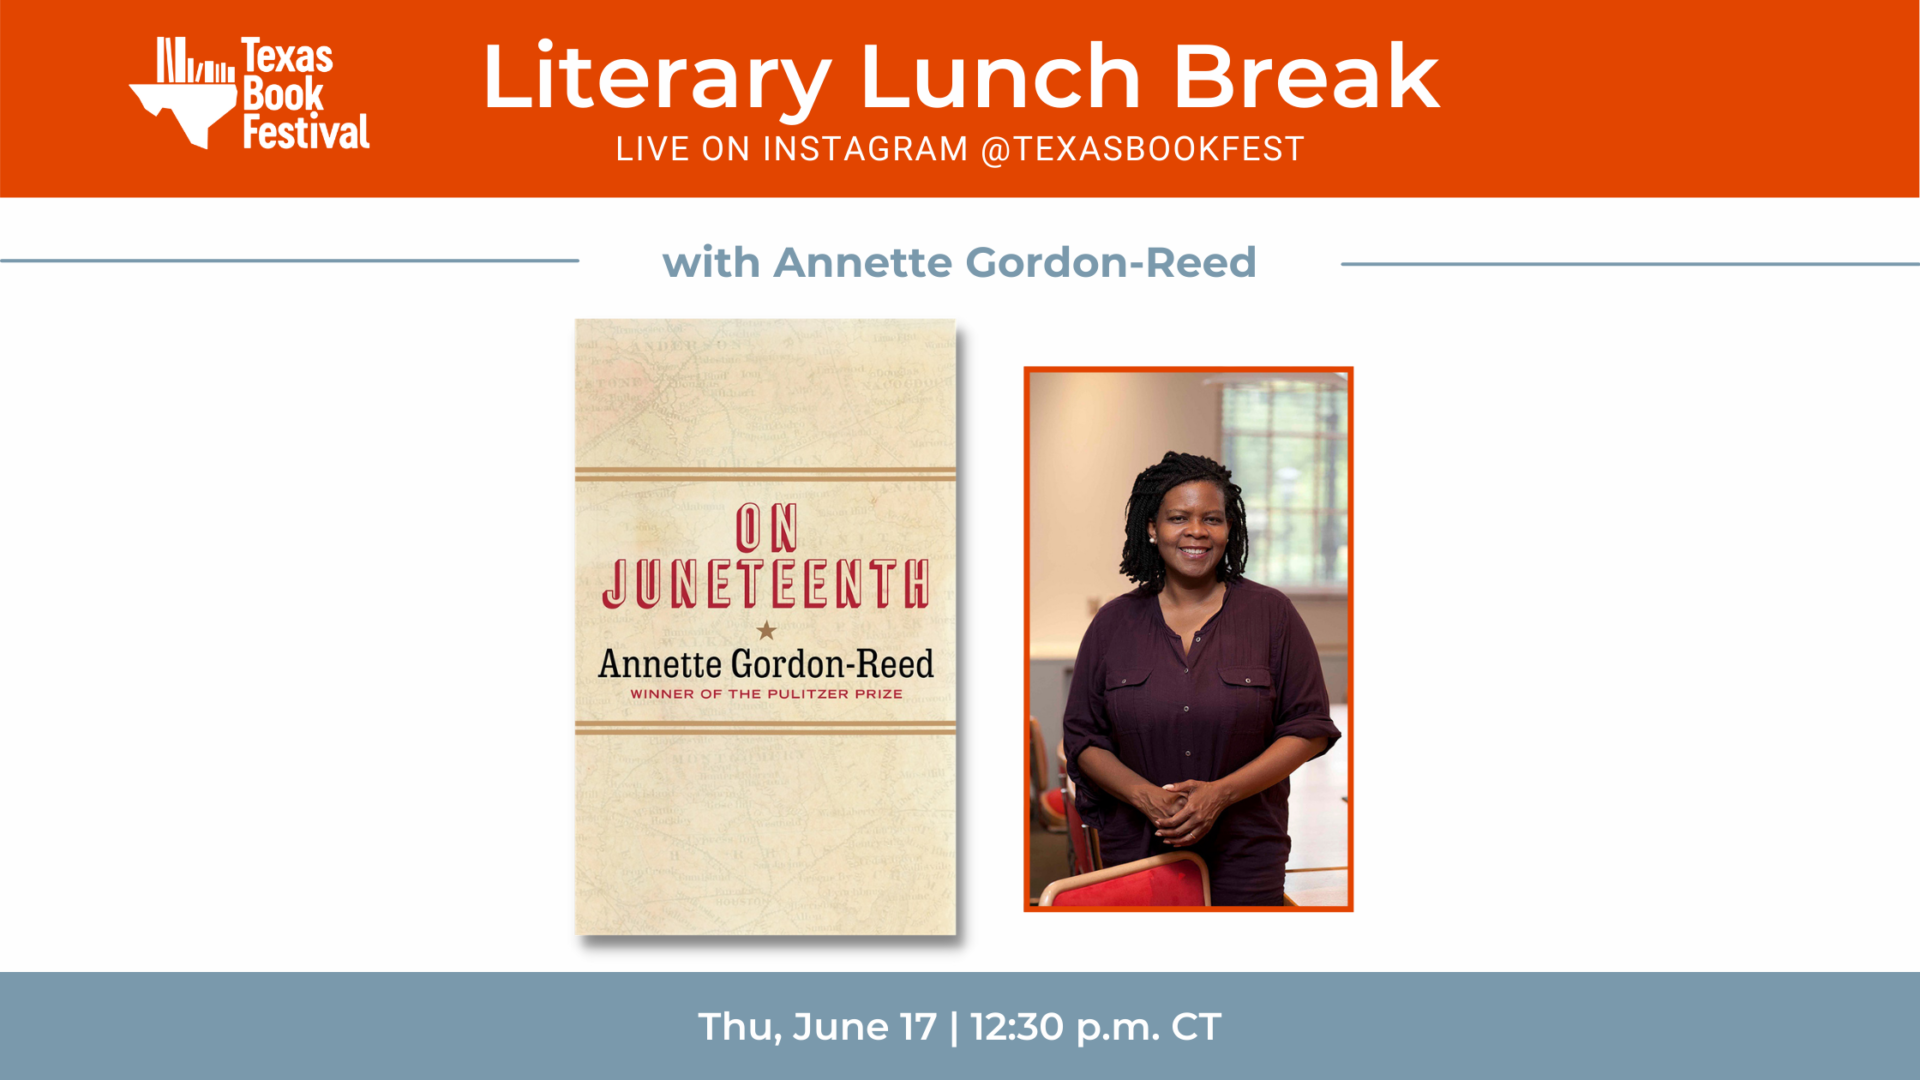 Join us for a Literary Lunch Break!